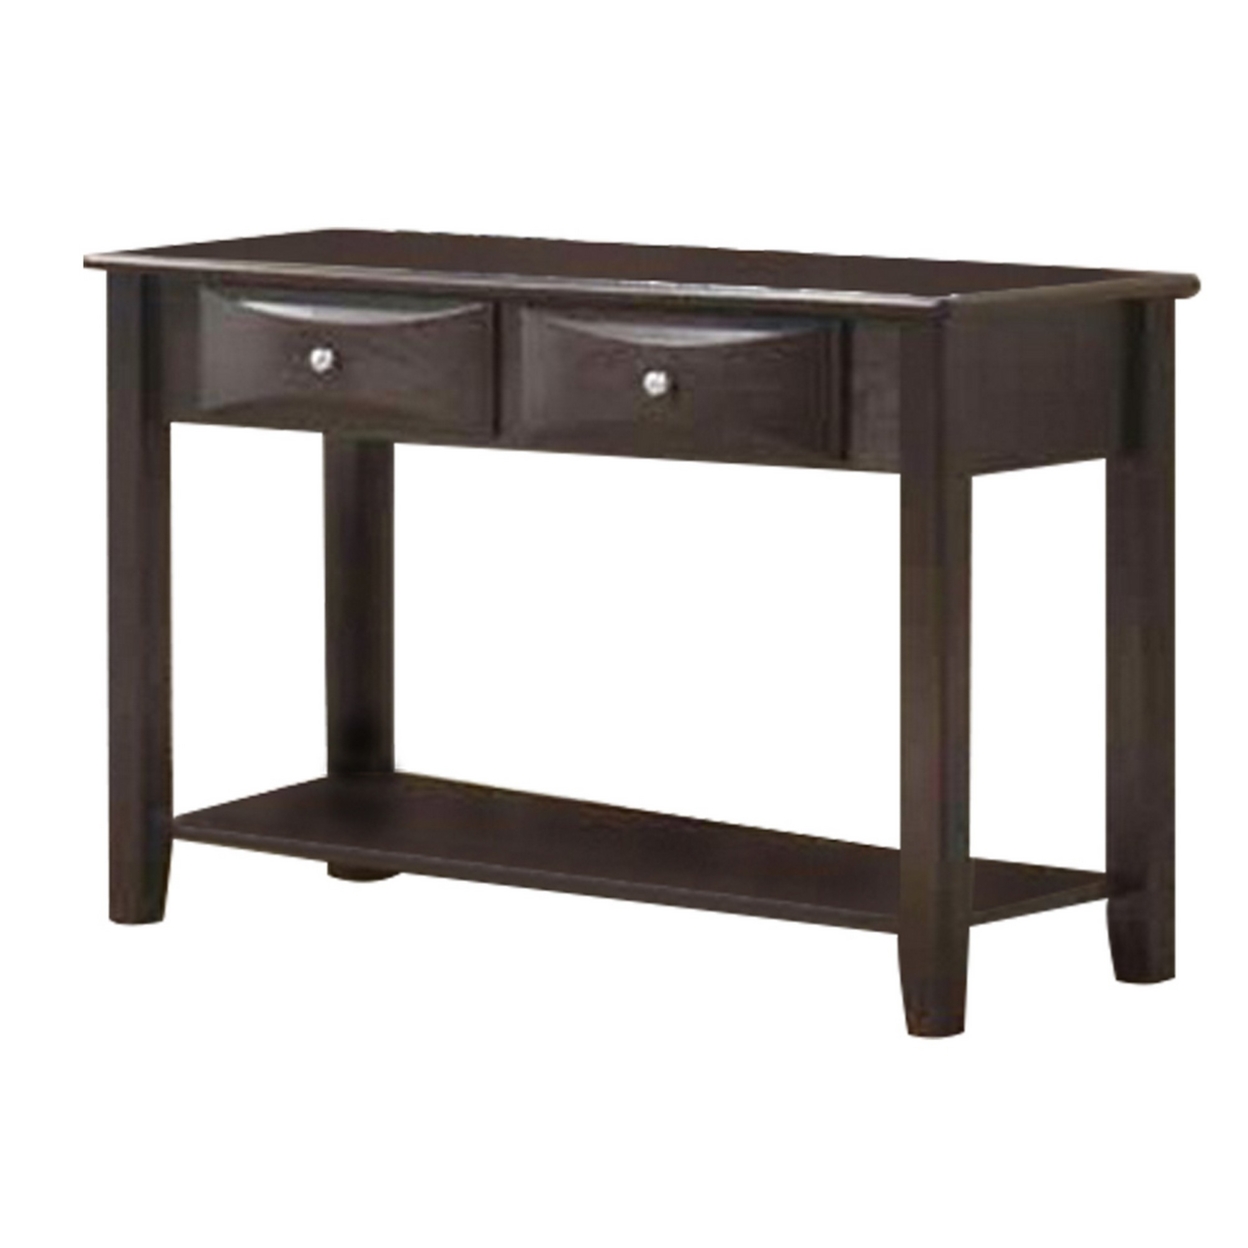 Wooden Console Table With 2 Spacious Drawers, Brown- Saltoro Sherpi